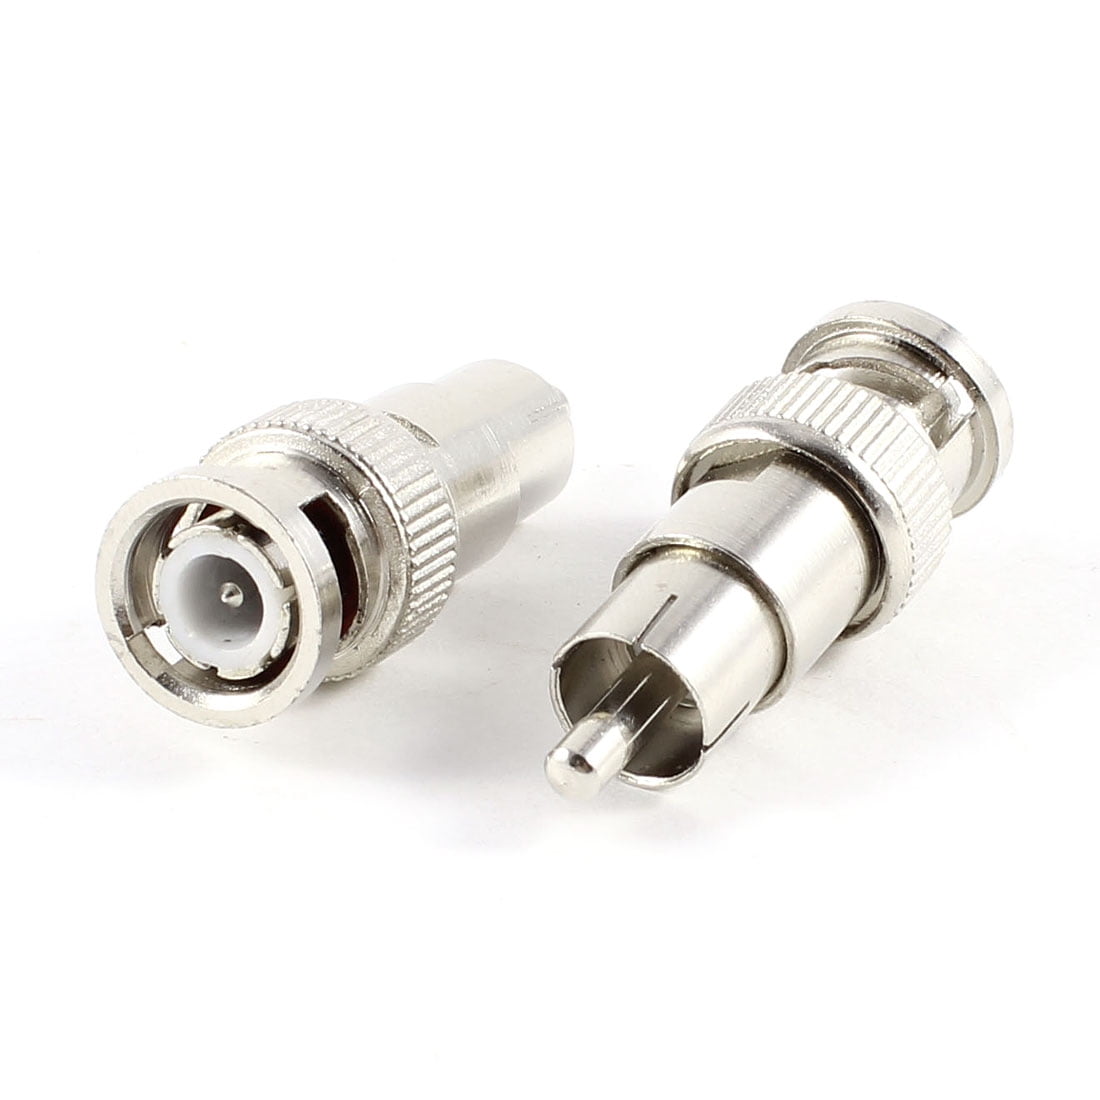 2 Pcs BNC Male to RCA Male RF Coaxial Connector Adapter for CCTV AD 